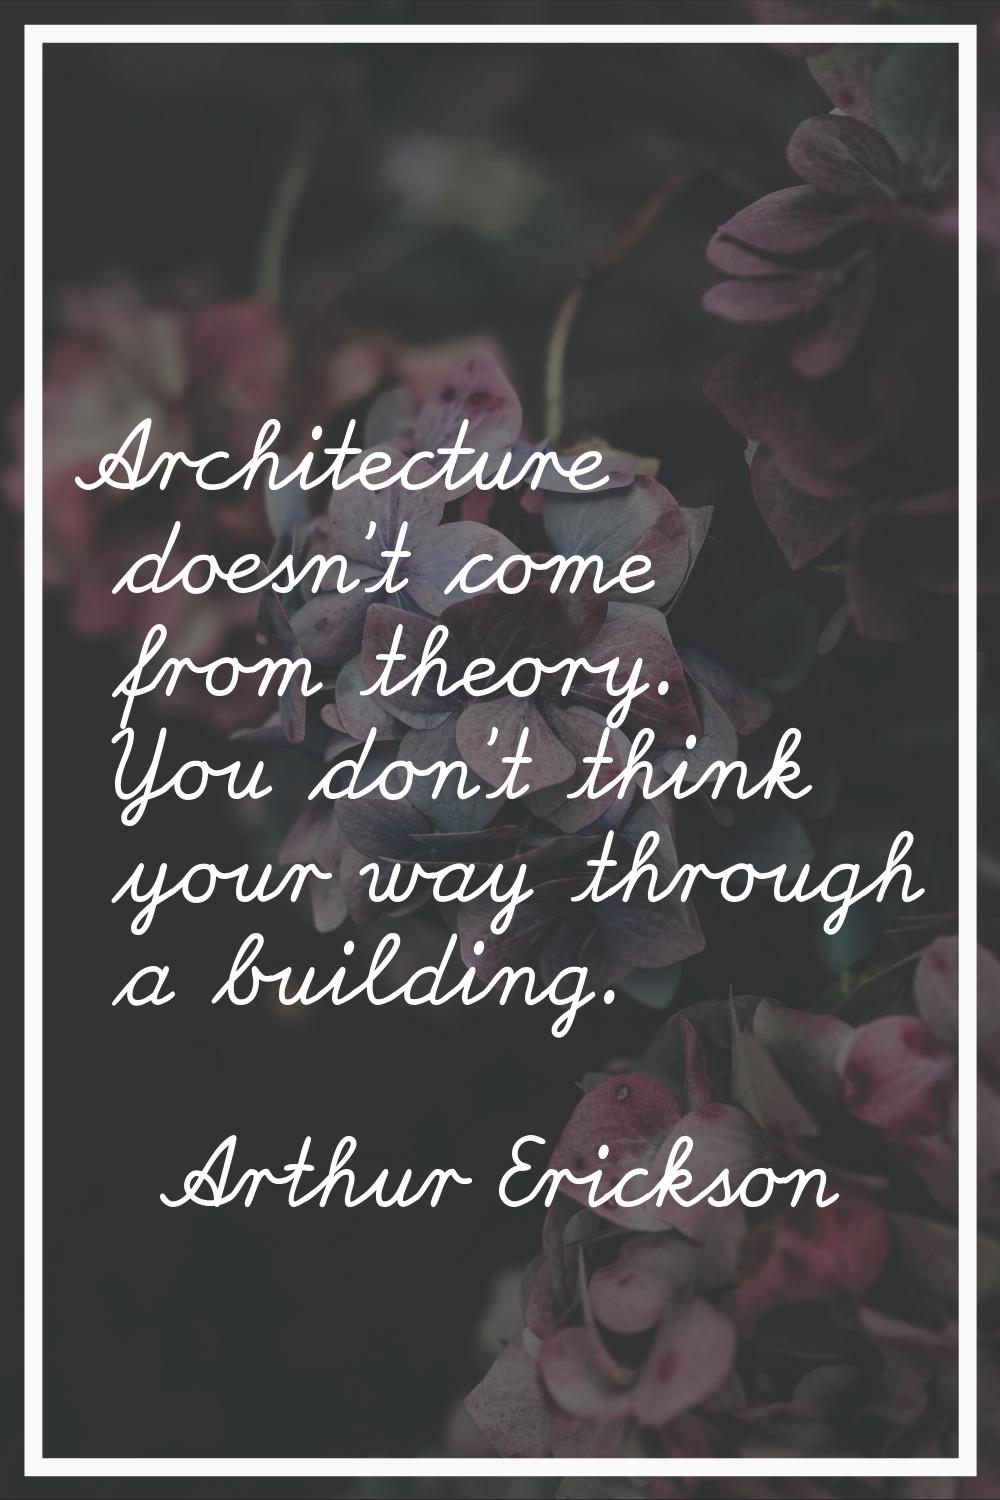 Architecture doesn't come from theory. You don't think your way through a building.